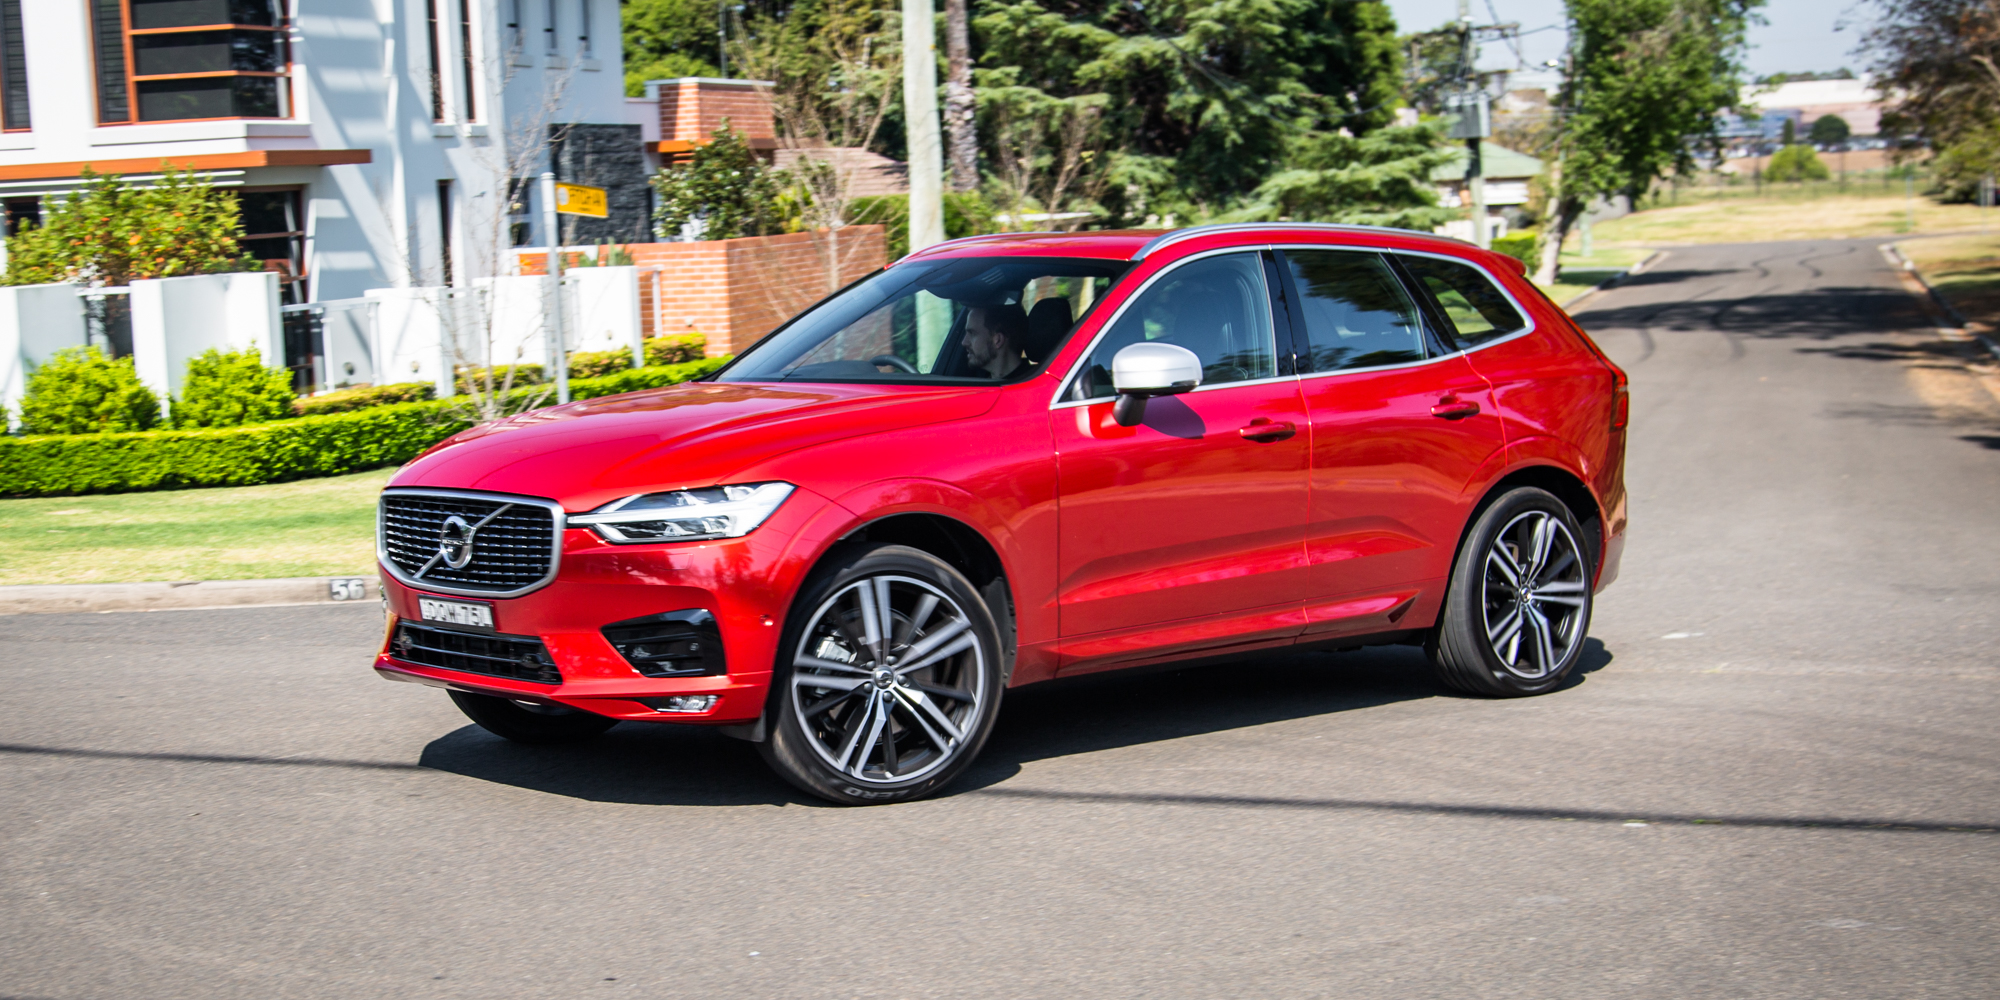 2018 Volvo XC60 D5 RDesign review CarAdvice